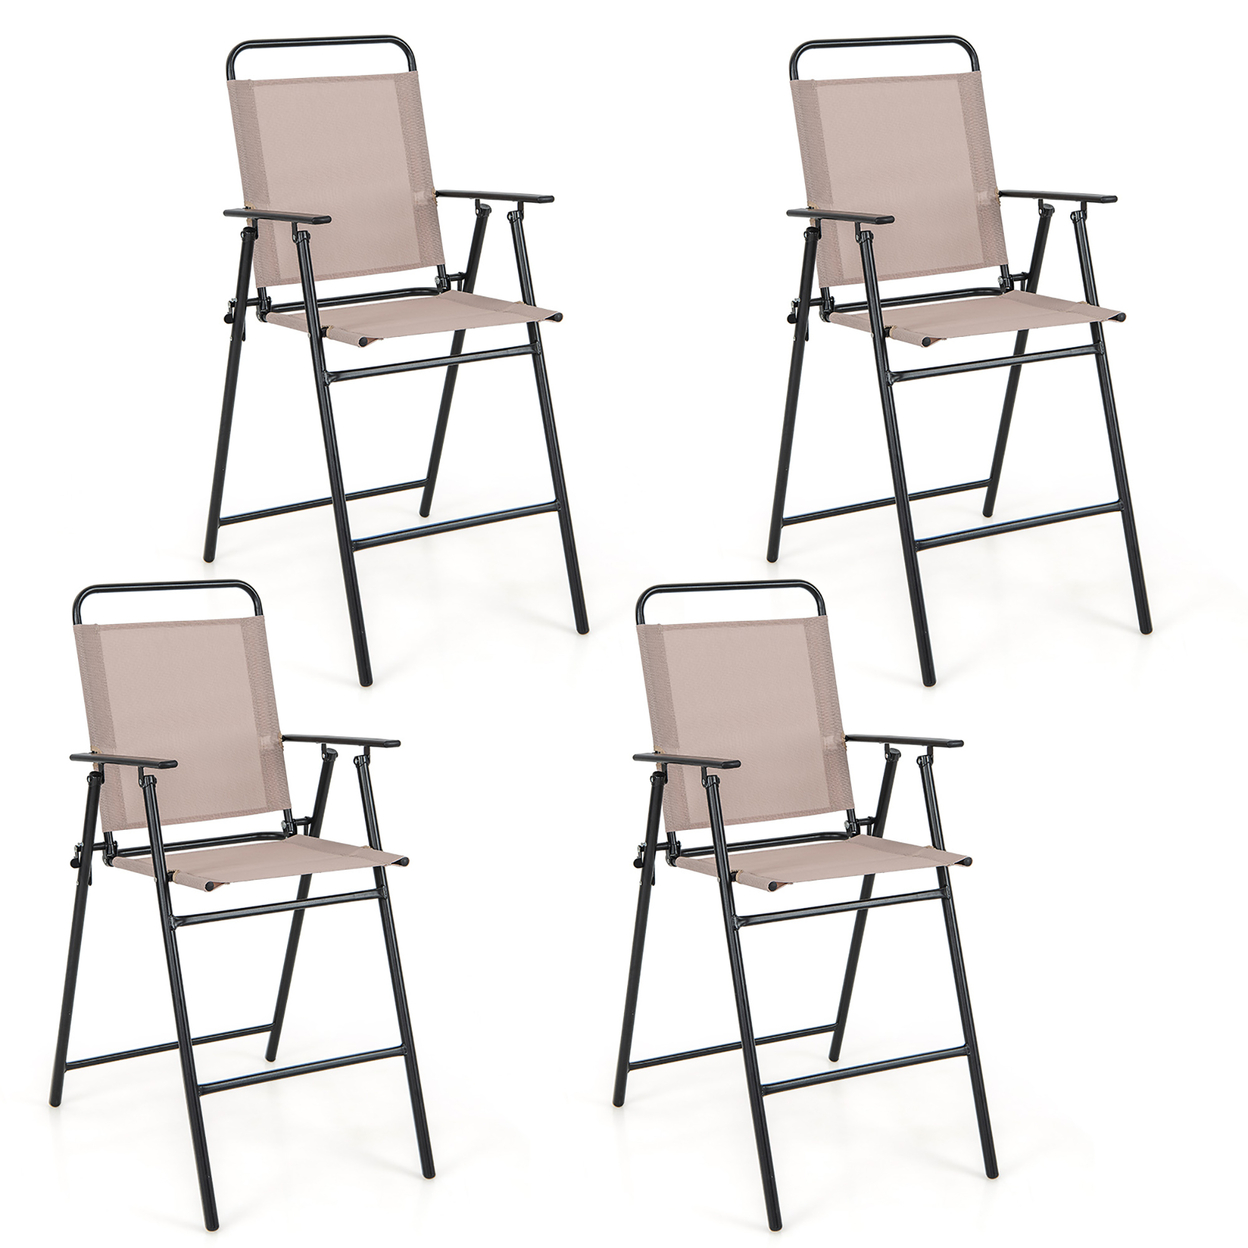 Outdoor Folding Bar Chair Set Of 4 Patio Dining Chairs W/ Breathable Fabric